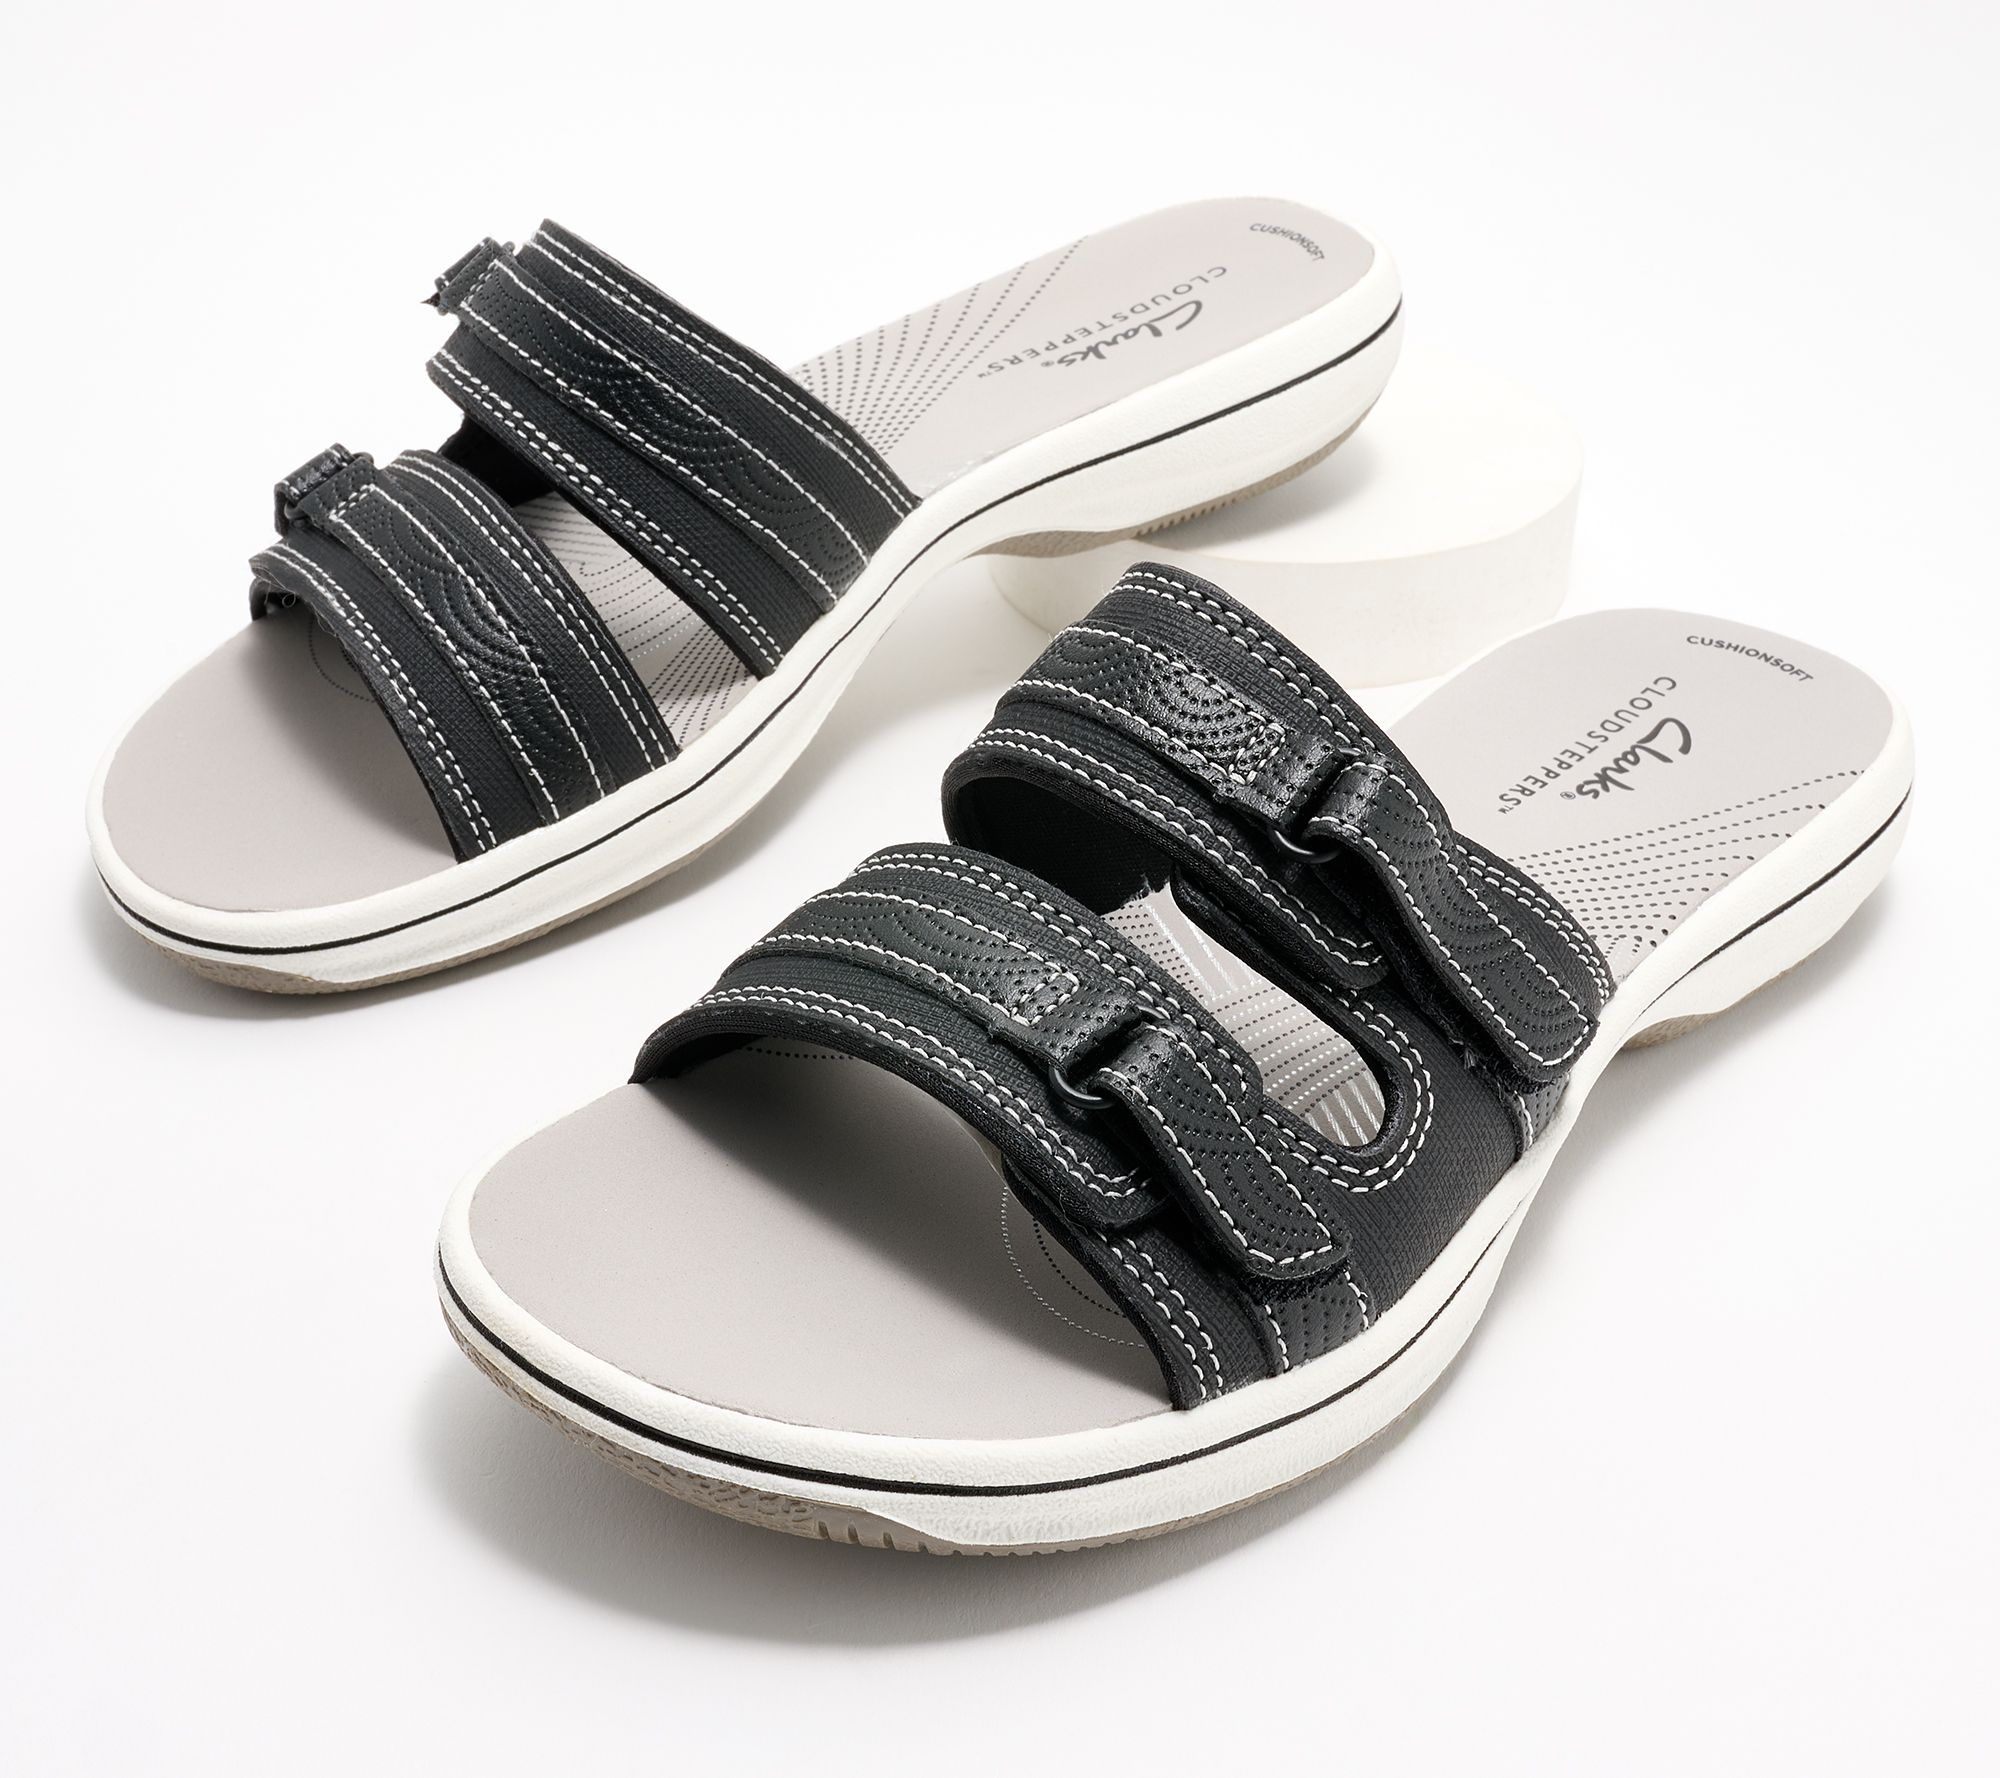 How to Clean Cloudsteppers Clarks Adjustable Sandals?